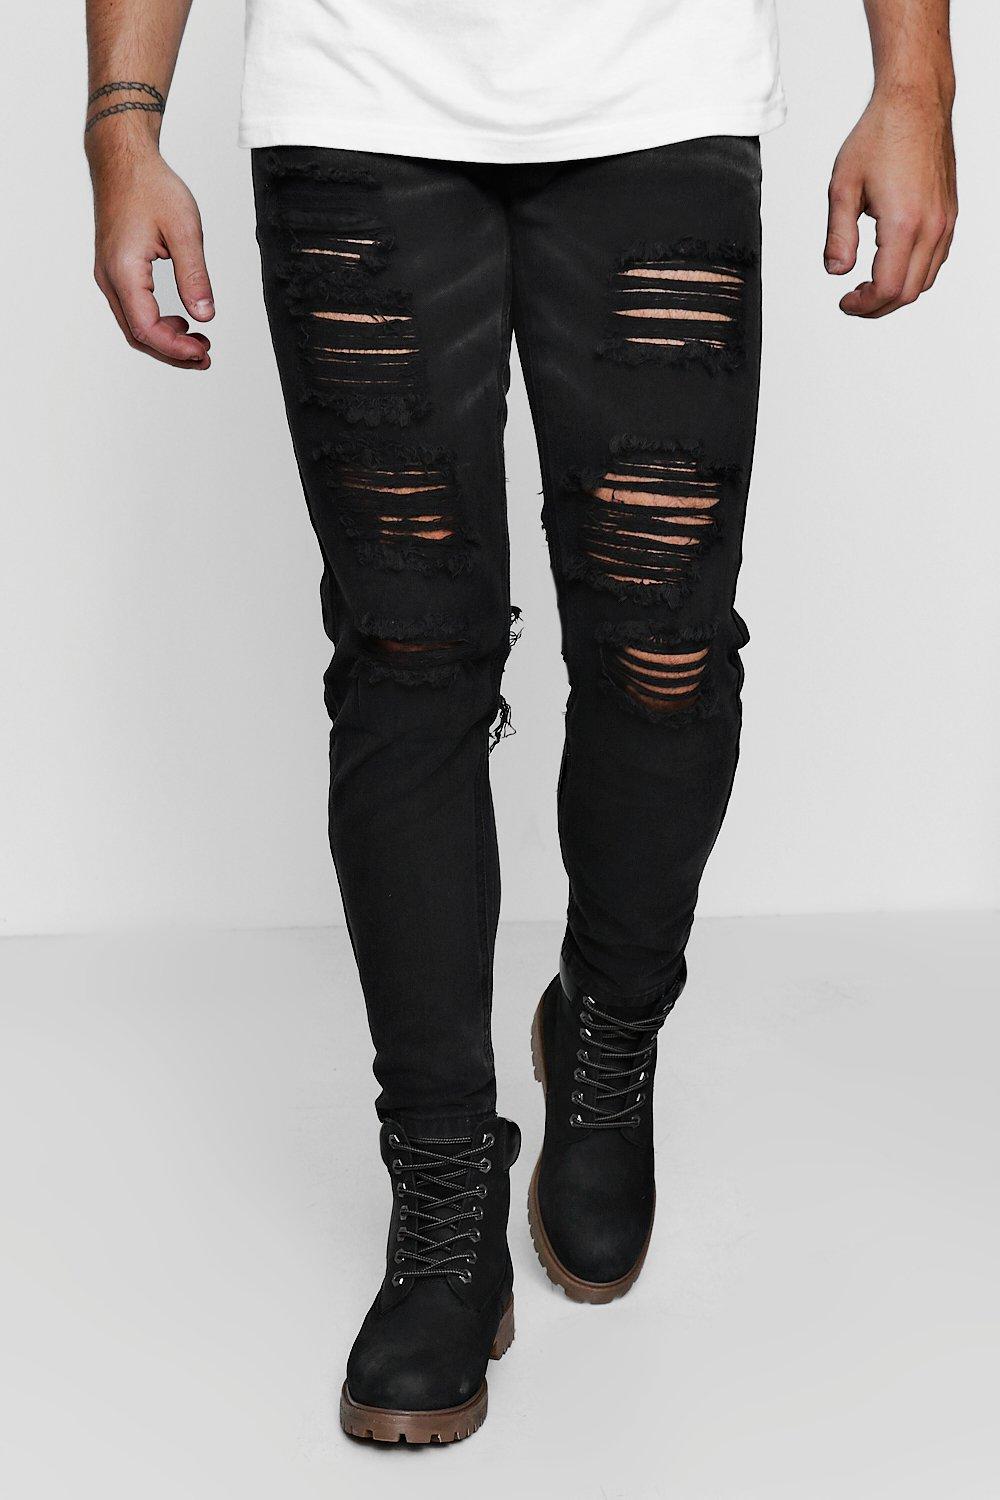 black jeans with lots of rips